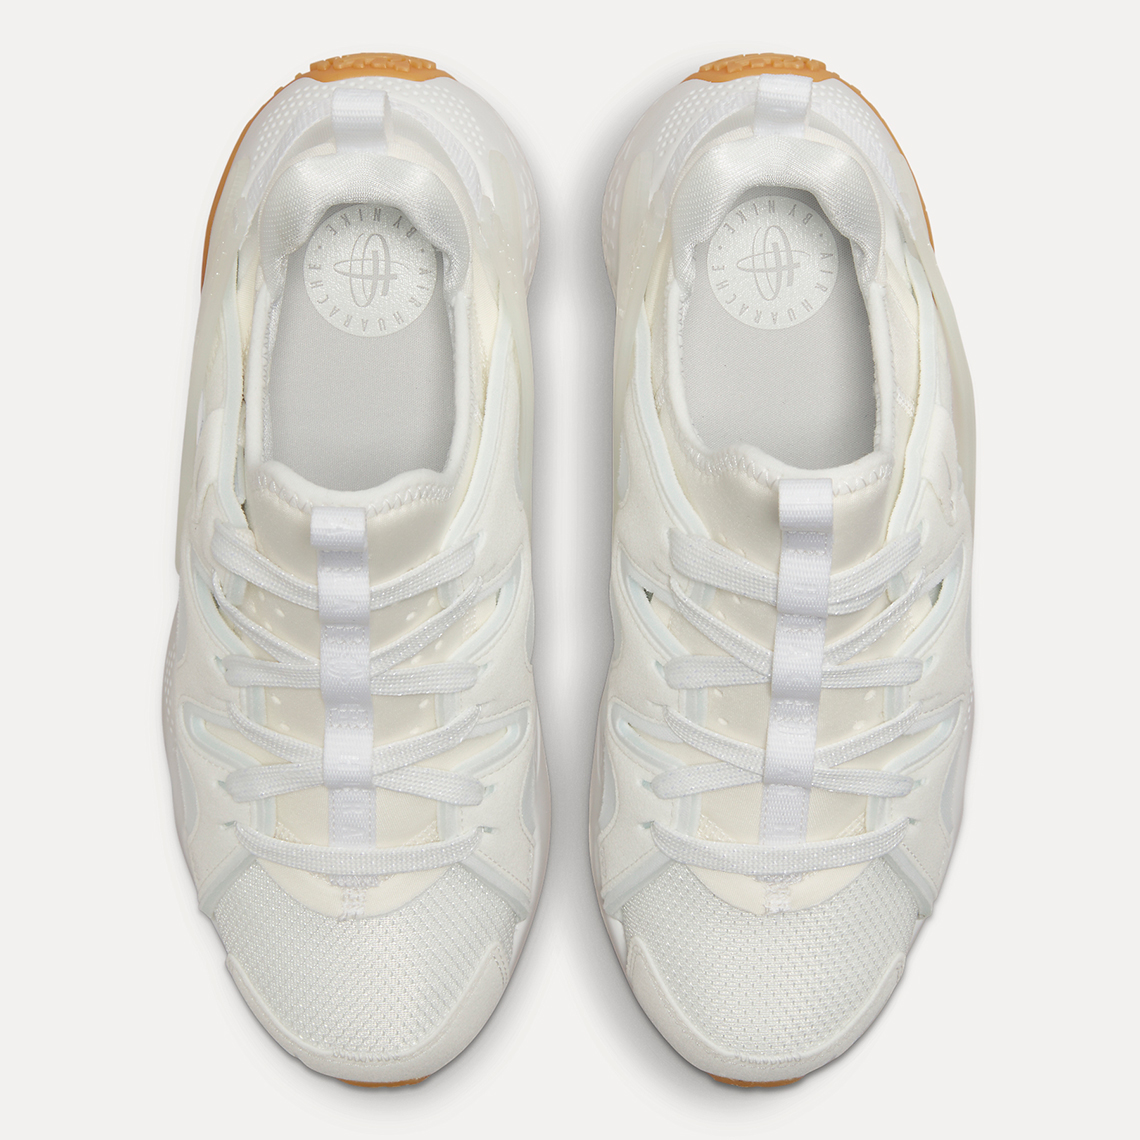 And some other Nike retailers too Sail Gum Dq8031 101 7